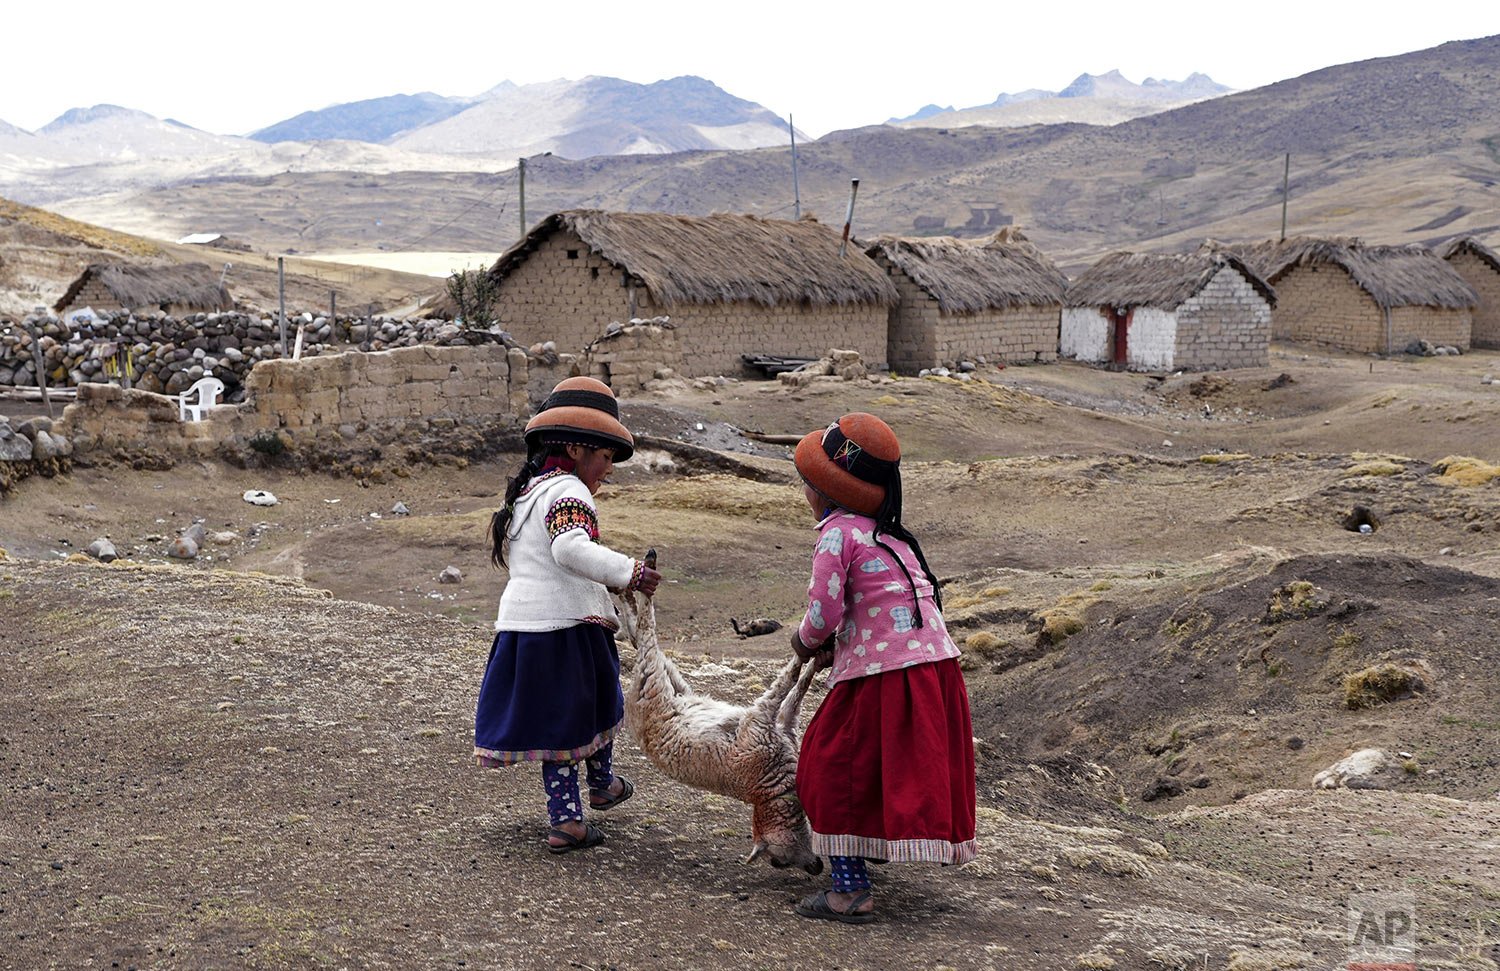  Girls carry a dying sheep in the Cconchaccota community of the Apurimac region in Peru, Saturday, Nov. 26, 2022, amid an ongoing drought. (AP Photo/Guadalupe Pardo) 